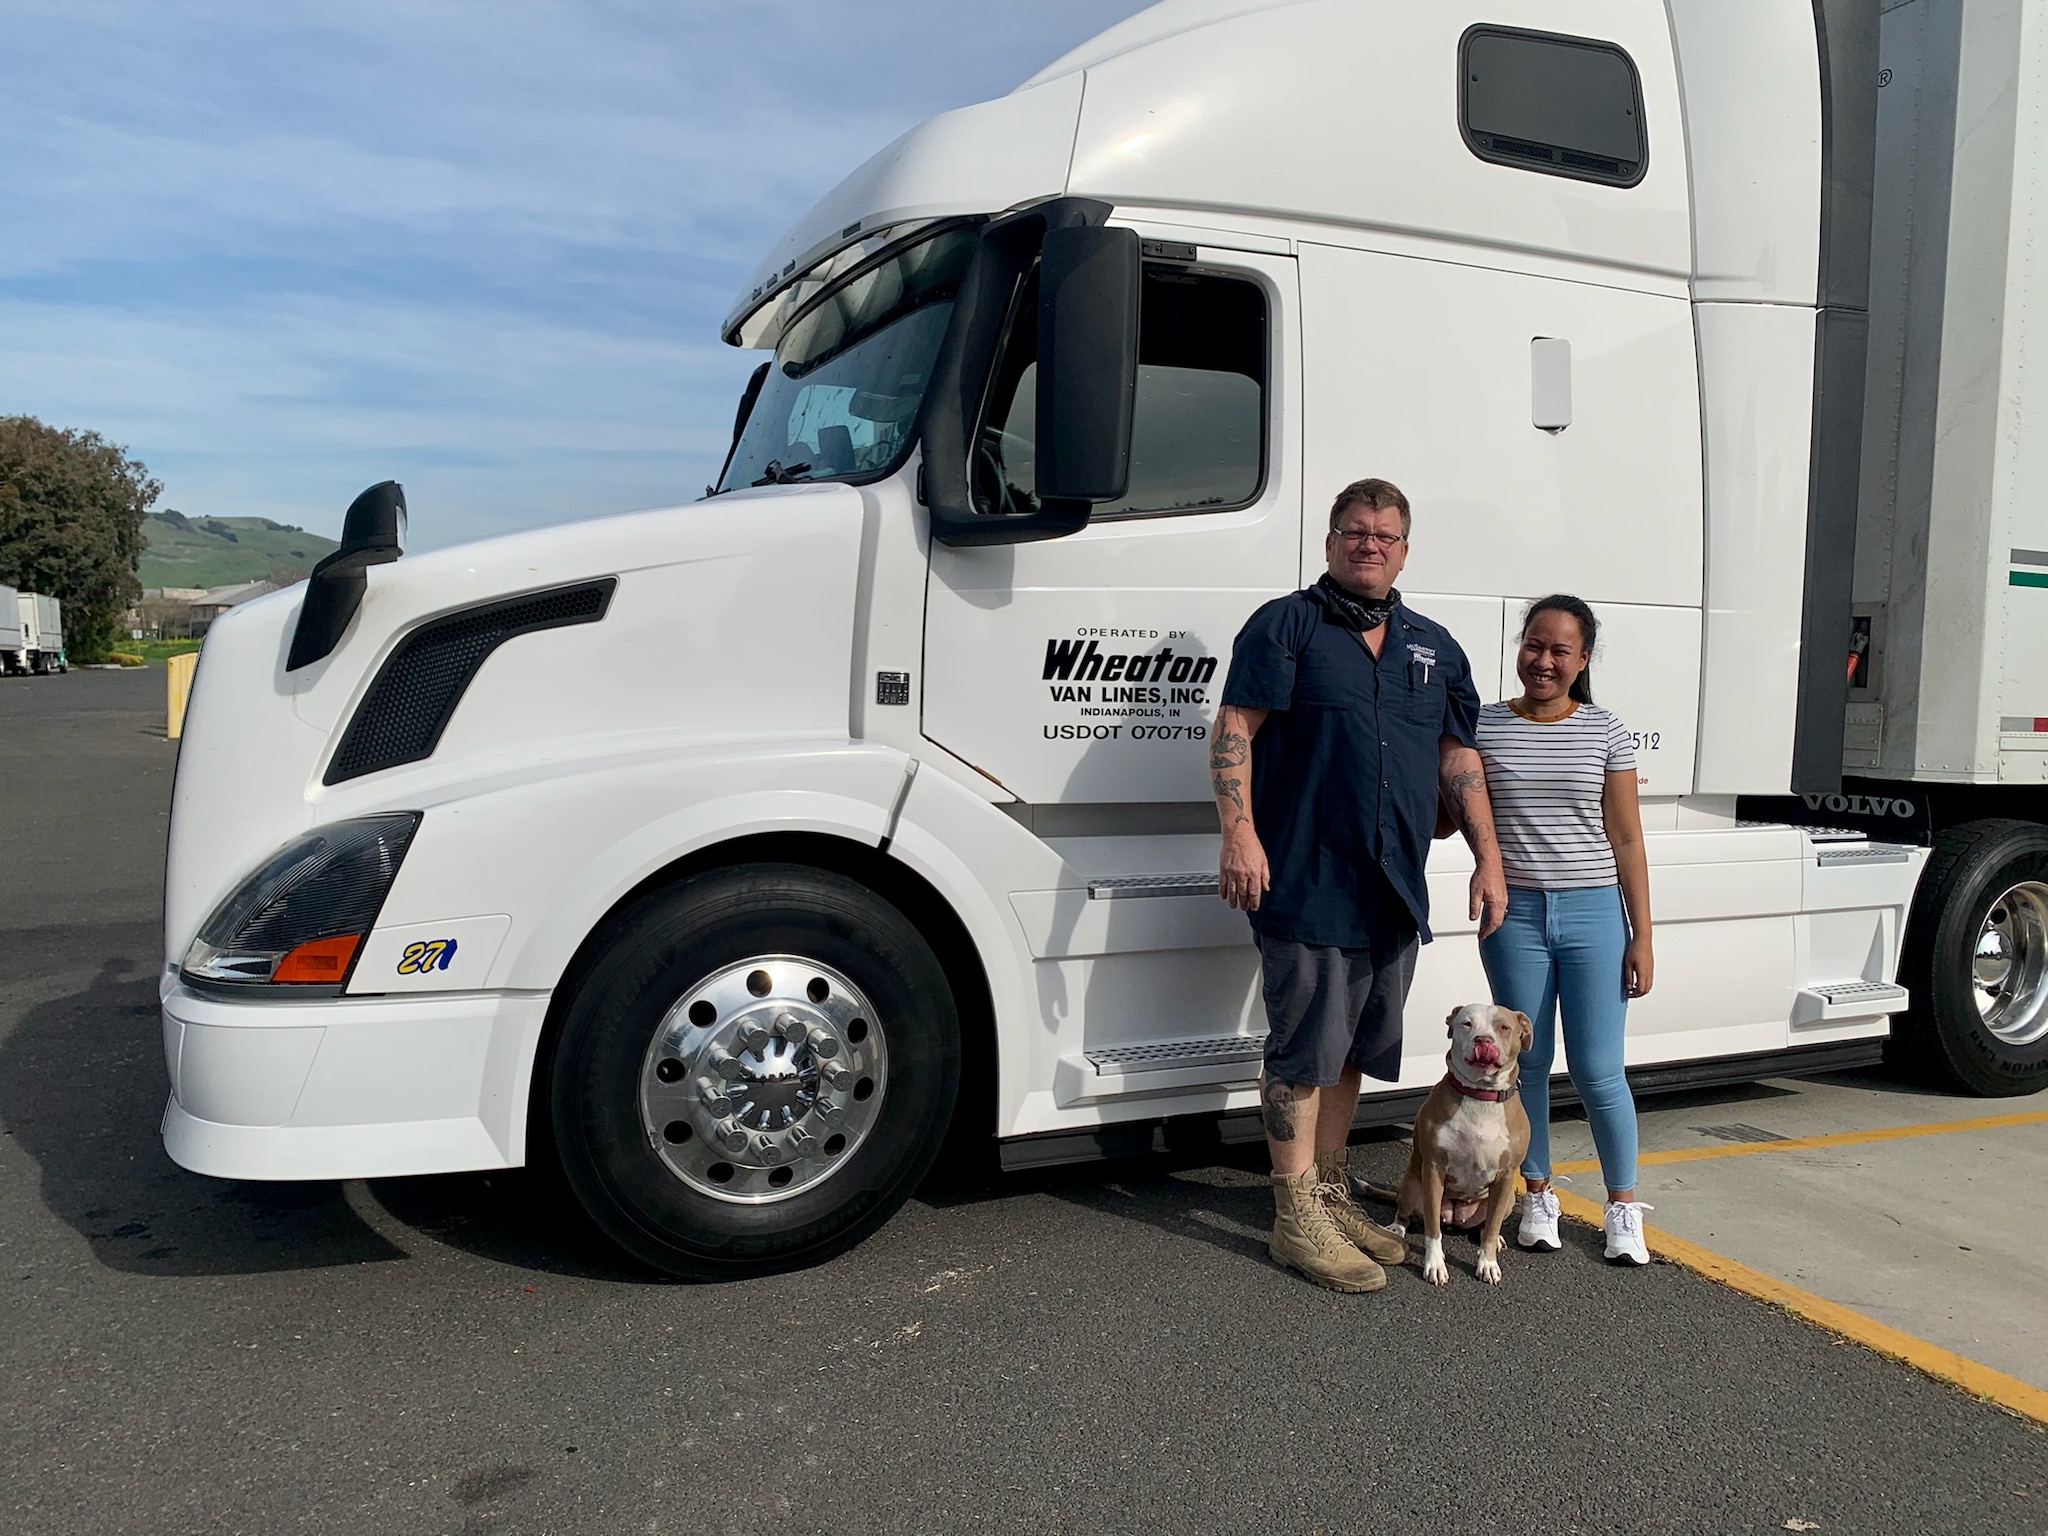 Our driver CJ, his wife Daisy, and their dog travel on the road together!